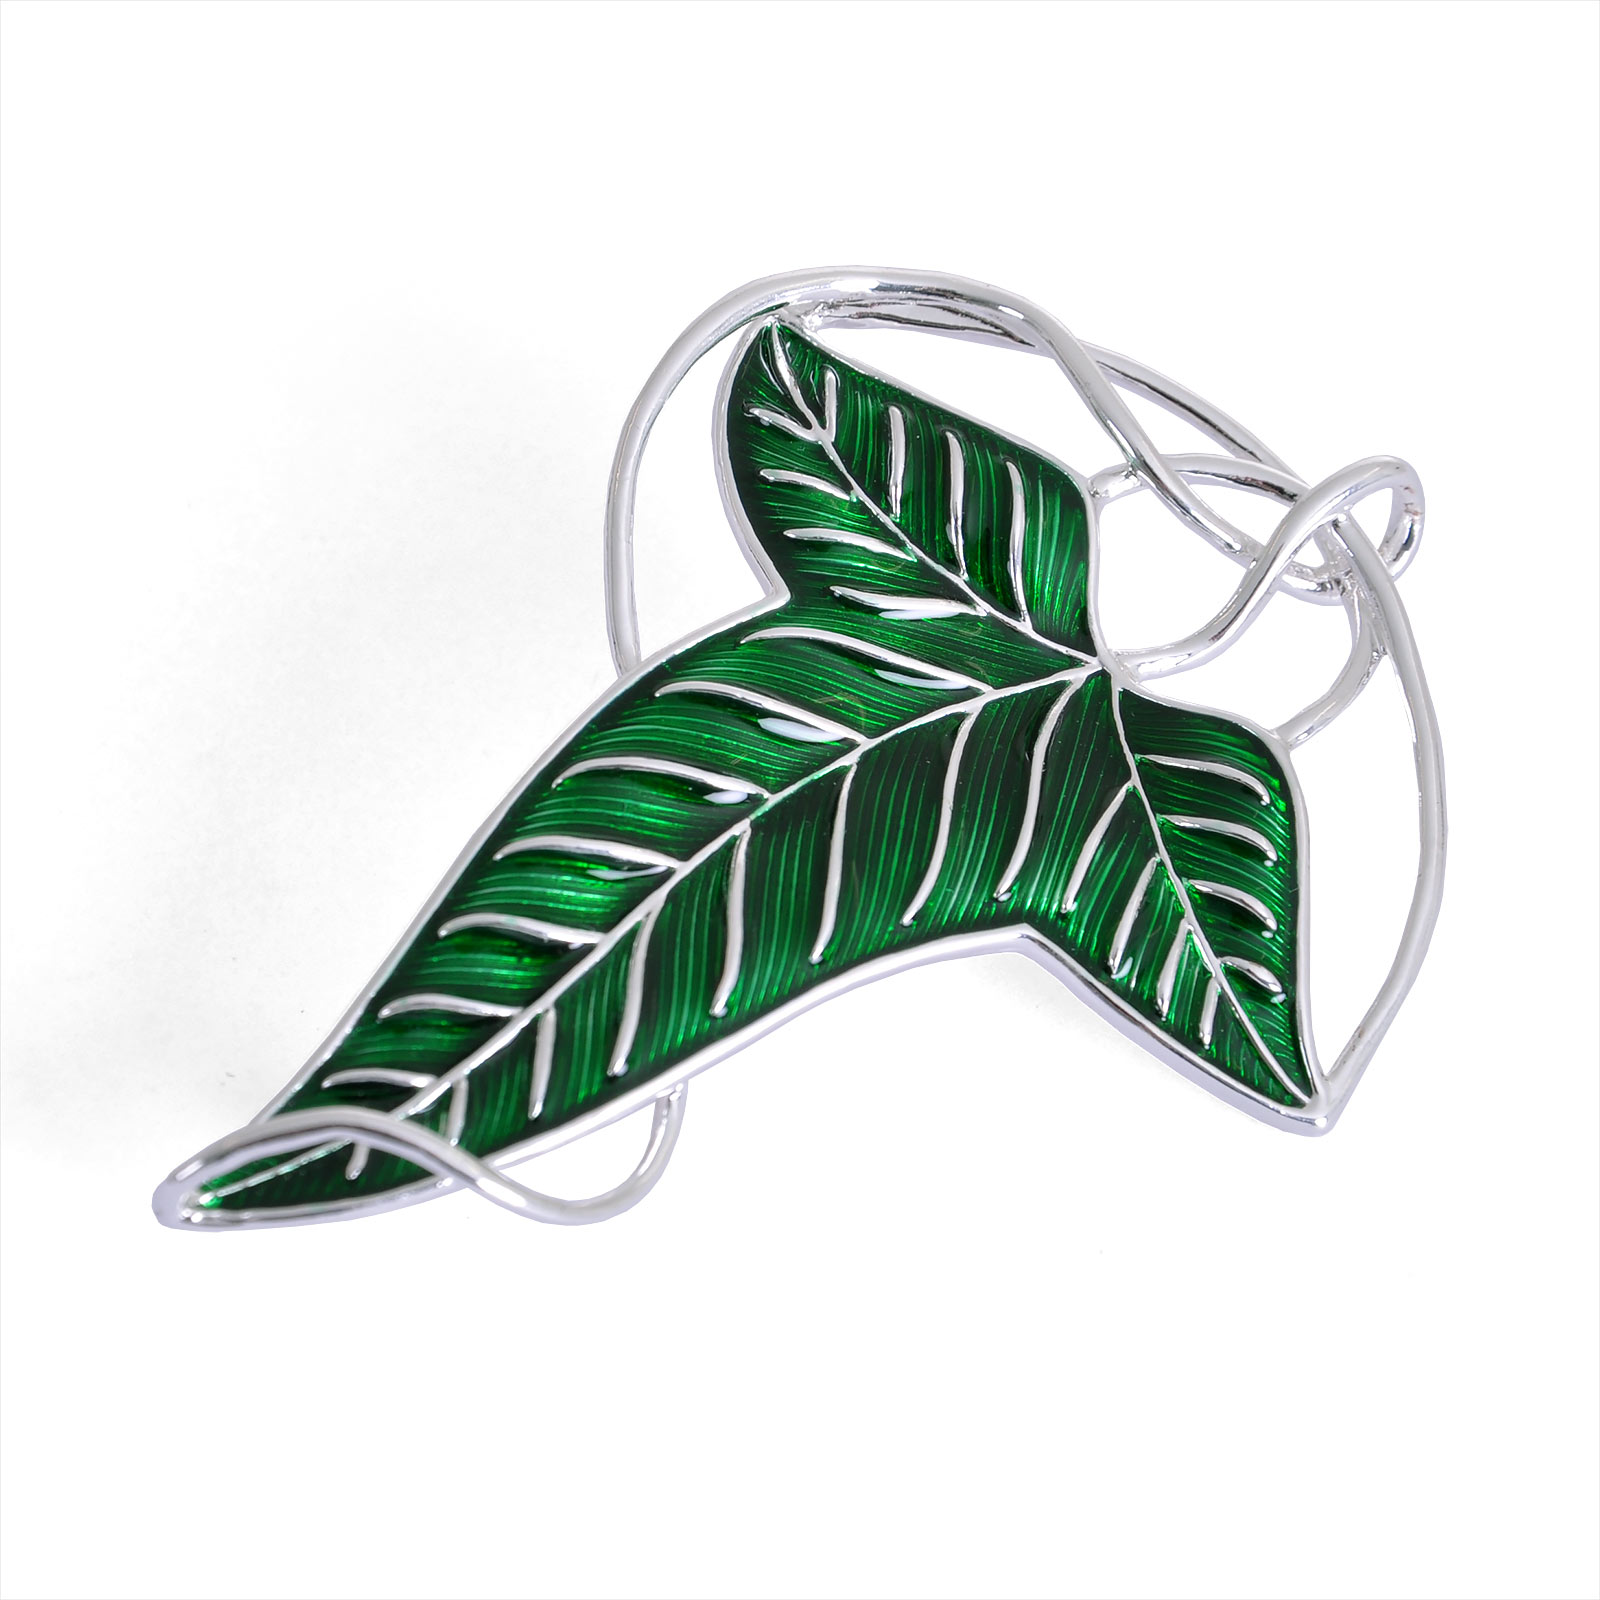 Lord of the Rings - Leaf Brooch Replica